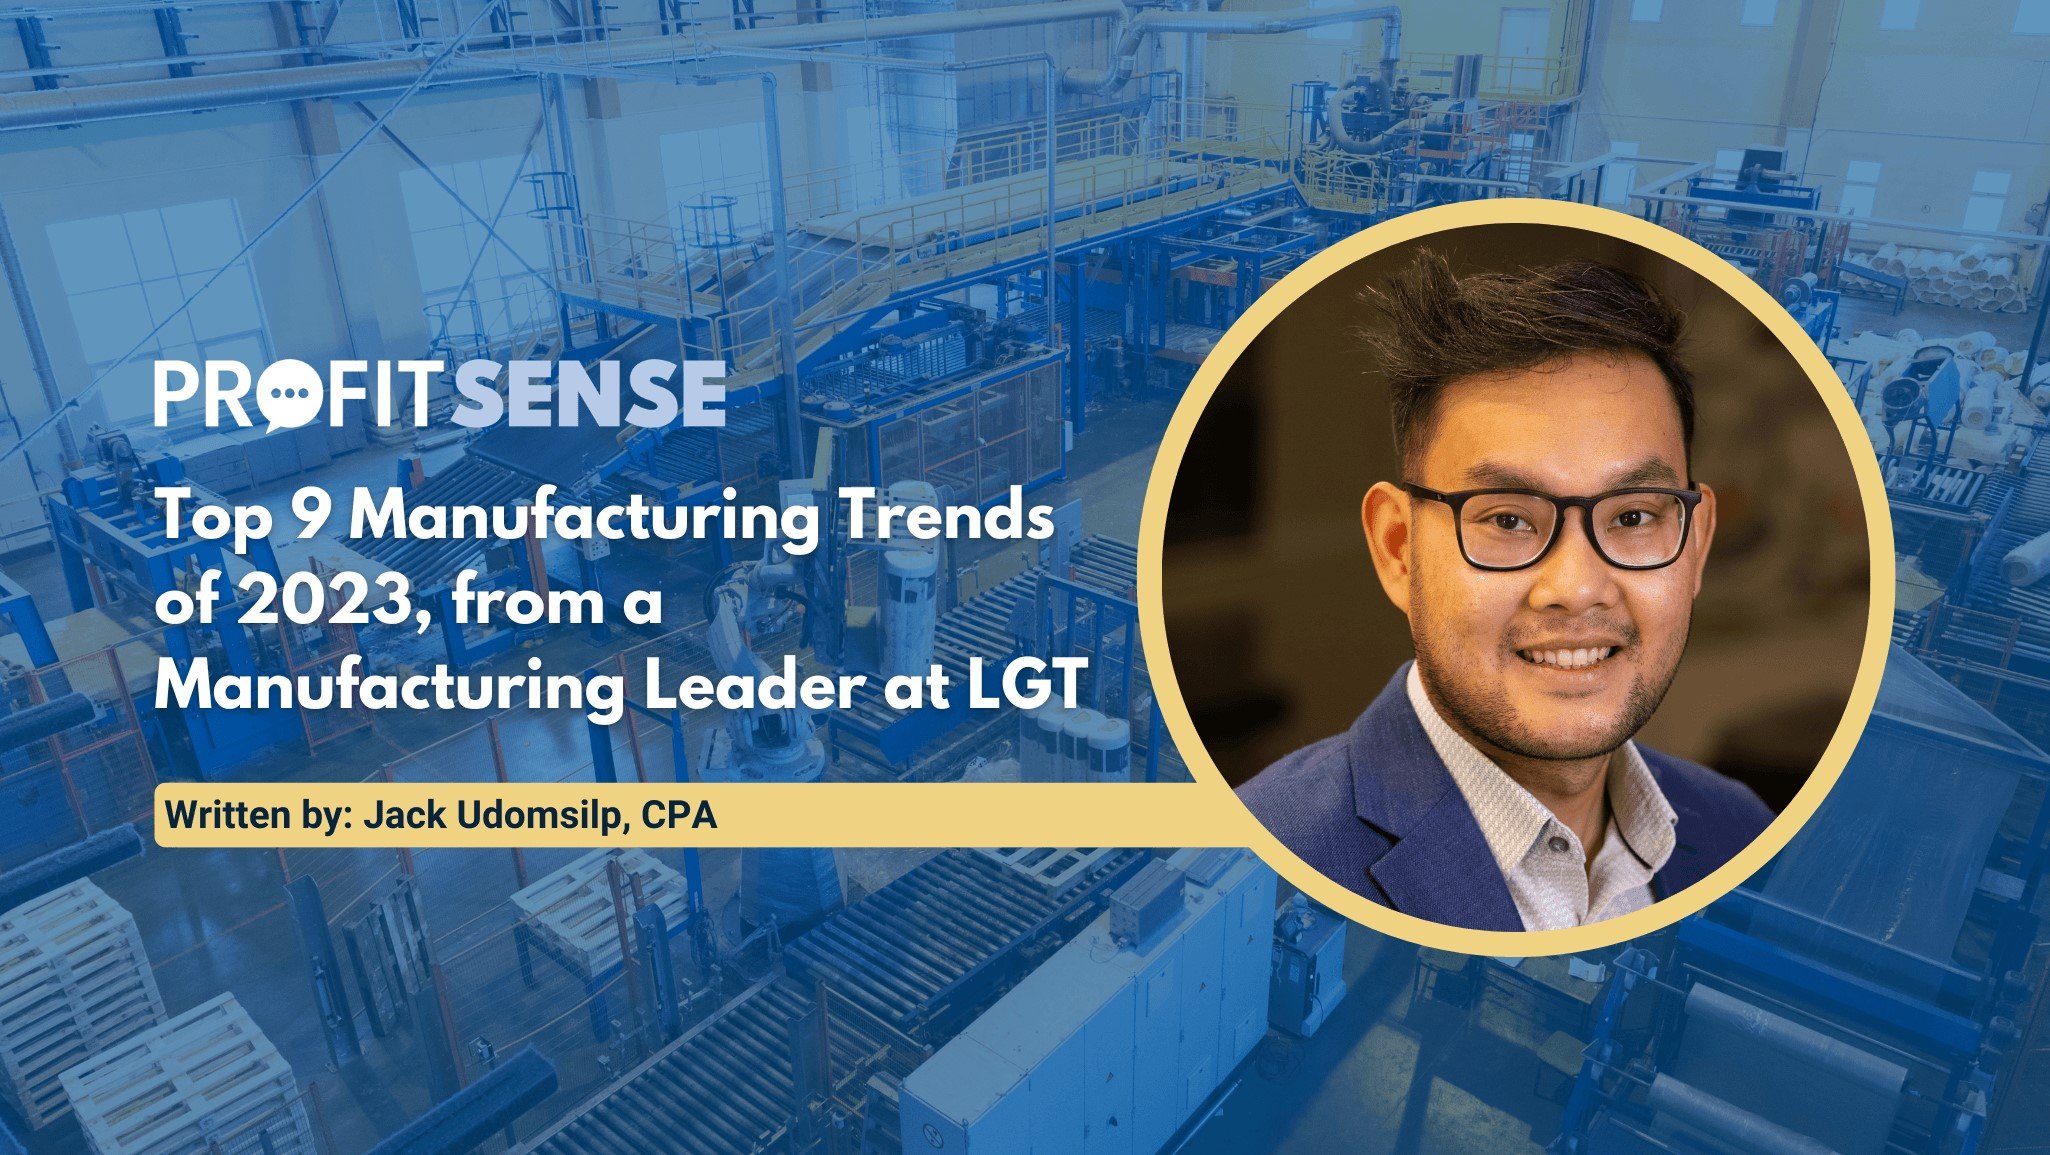 Top 9 Manufacturing Trends of 2023, from a Manufacturing Leader at LGT